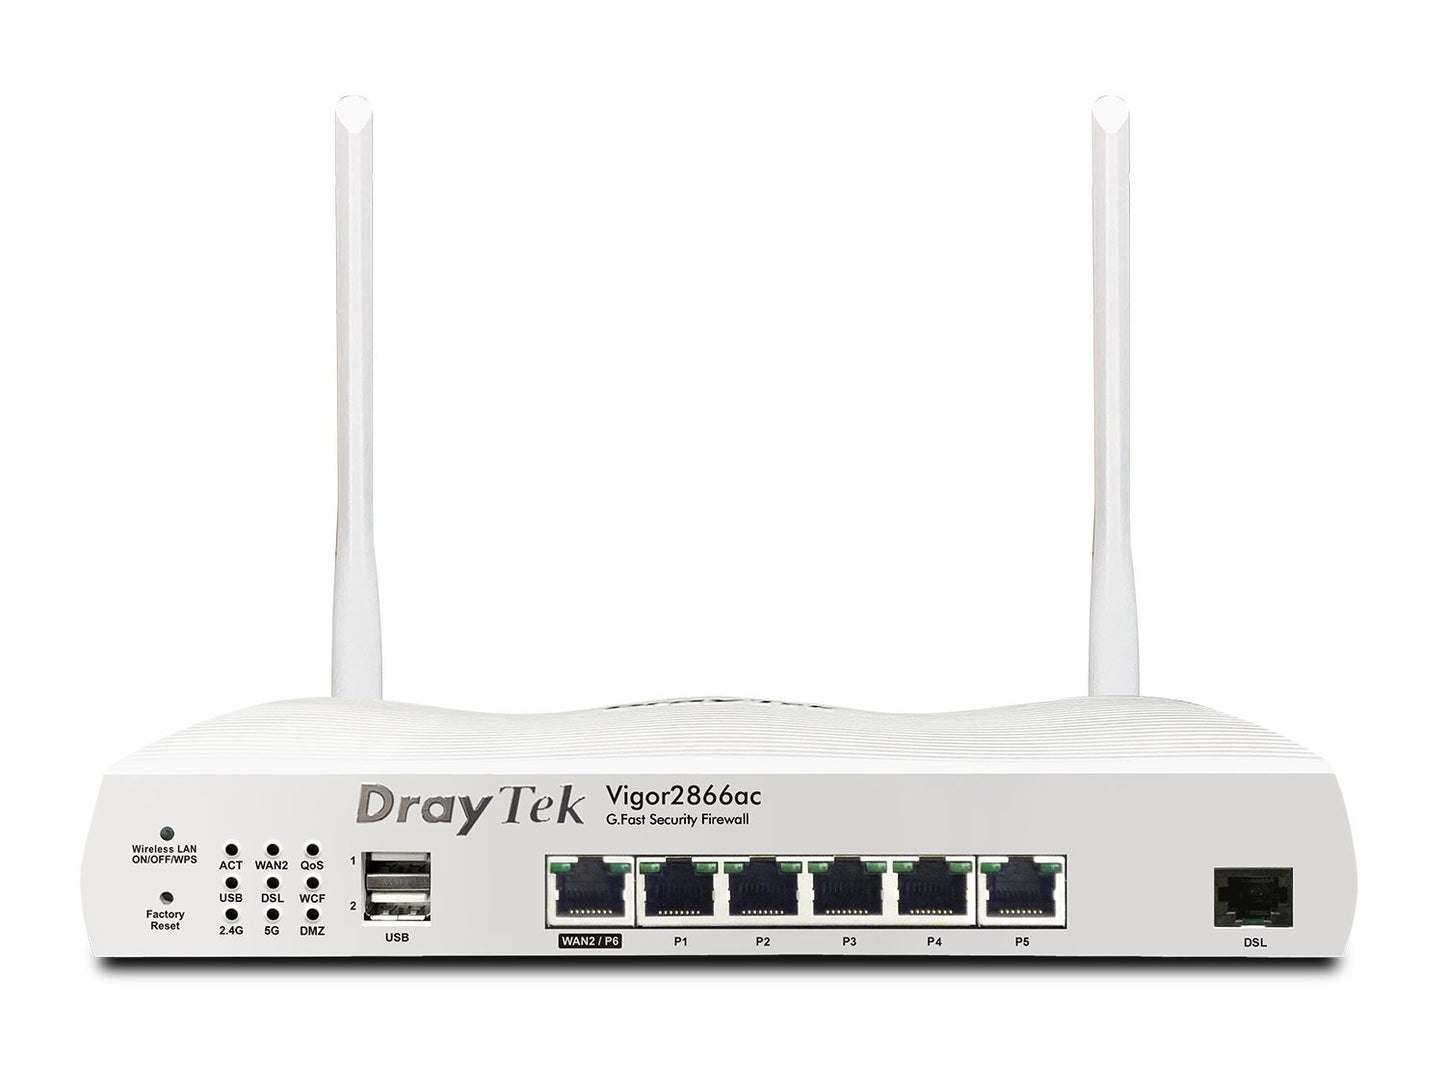 DrayTek 2866ac G.fast DSL Ethernet Wifi Router Front View